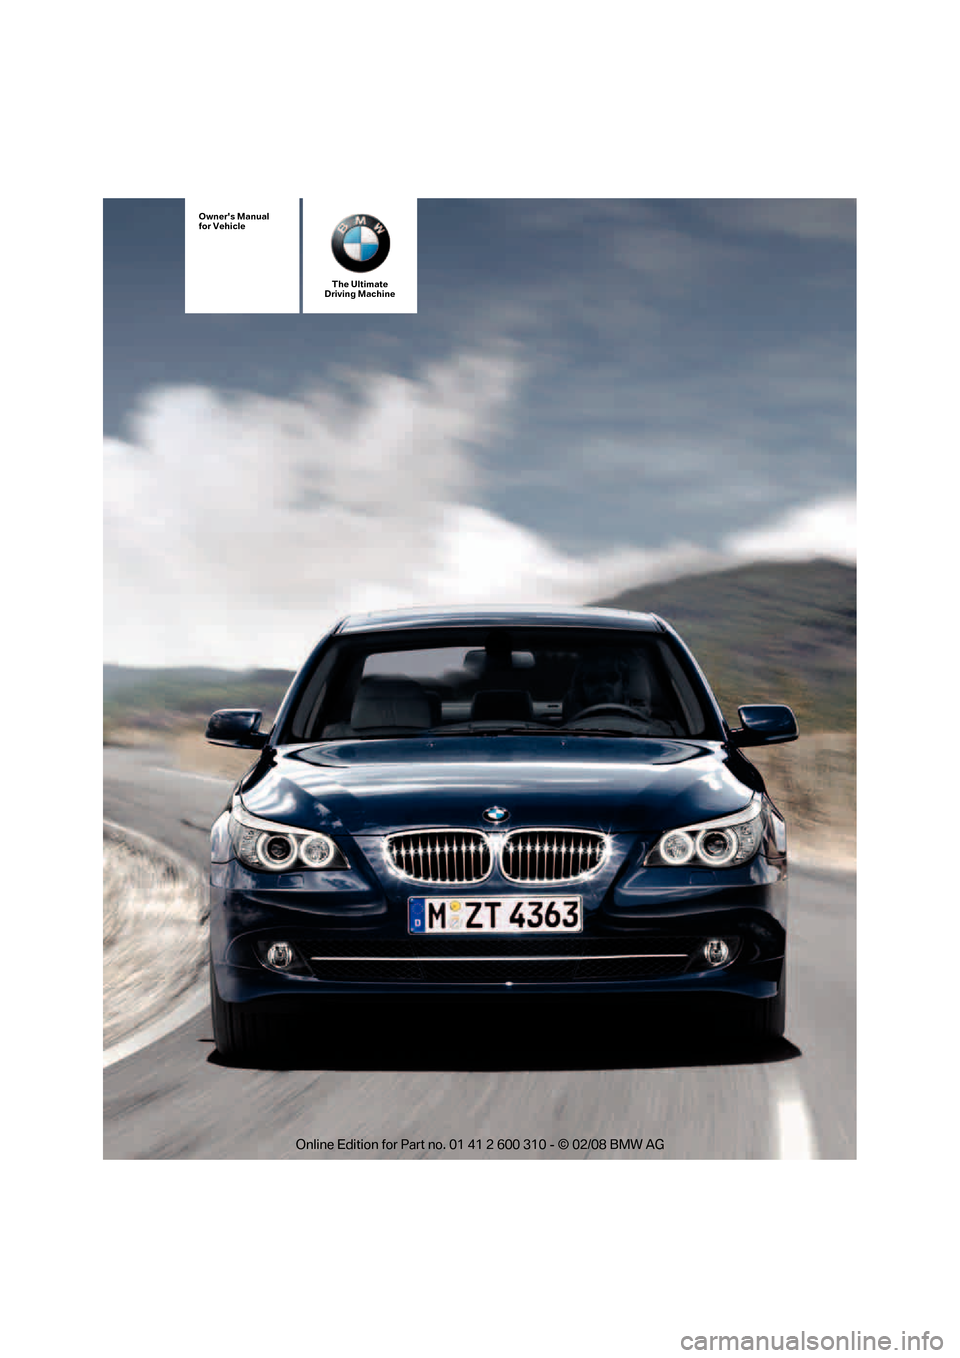 BMW 530I TOURING 2008 E61 Owners Manual The Ultimate
Driving Machine
Owners Manual
for Vehicle 